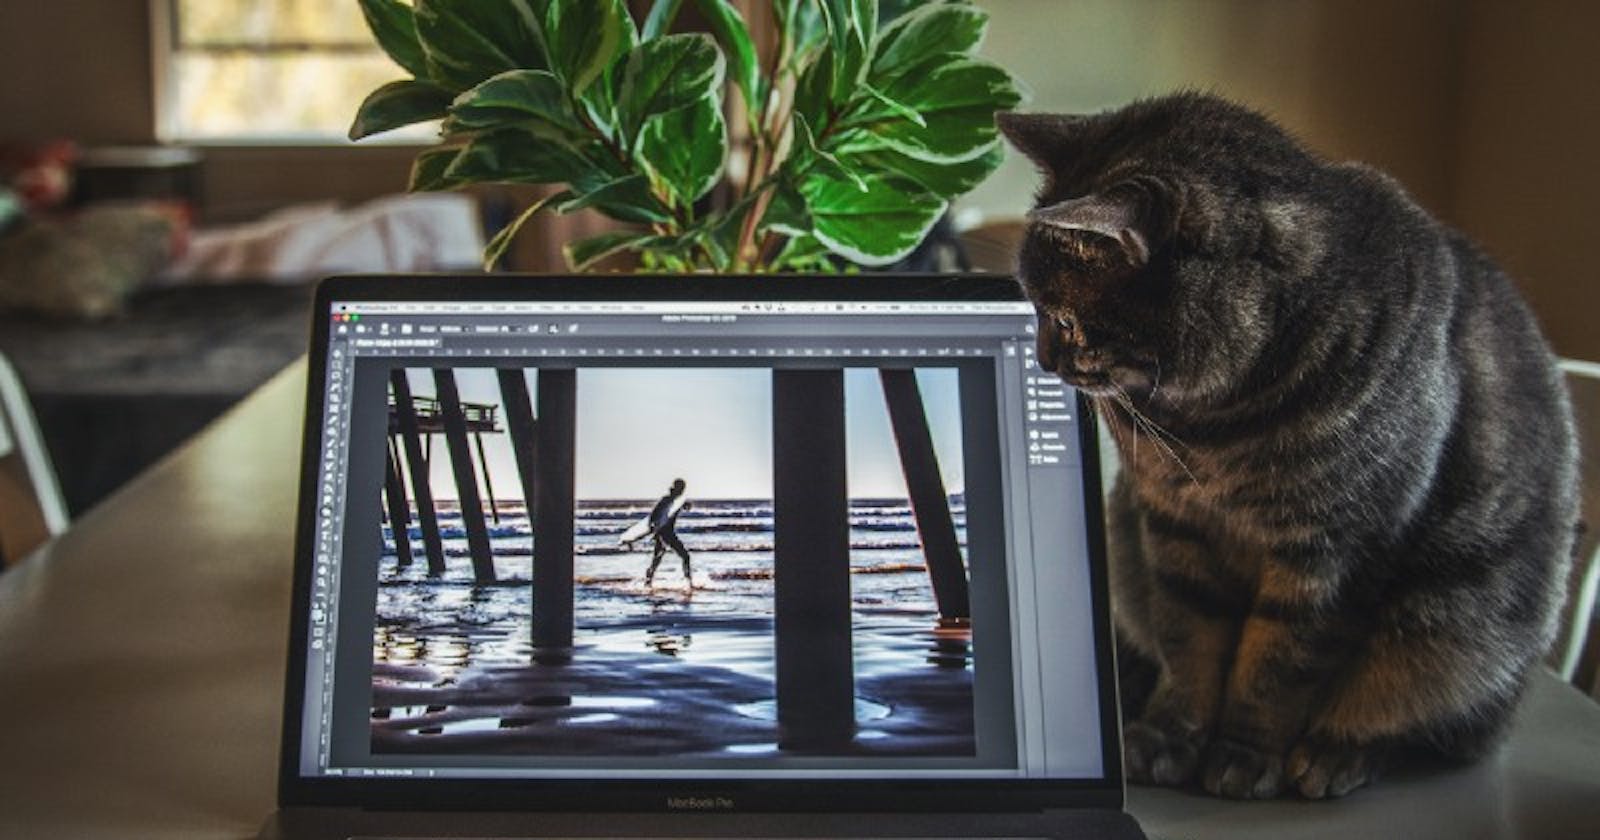 How Pets Can Make You a Better Programmer - Yes, Your Pet Can Do That